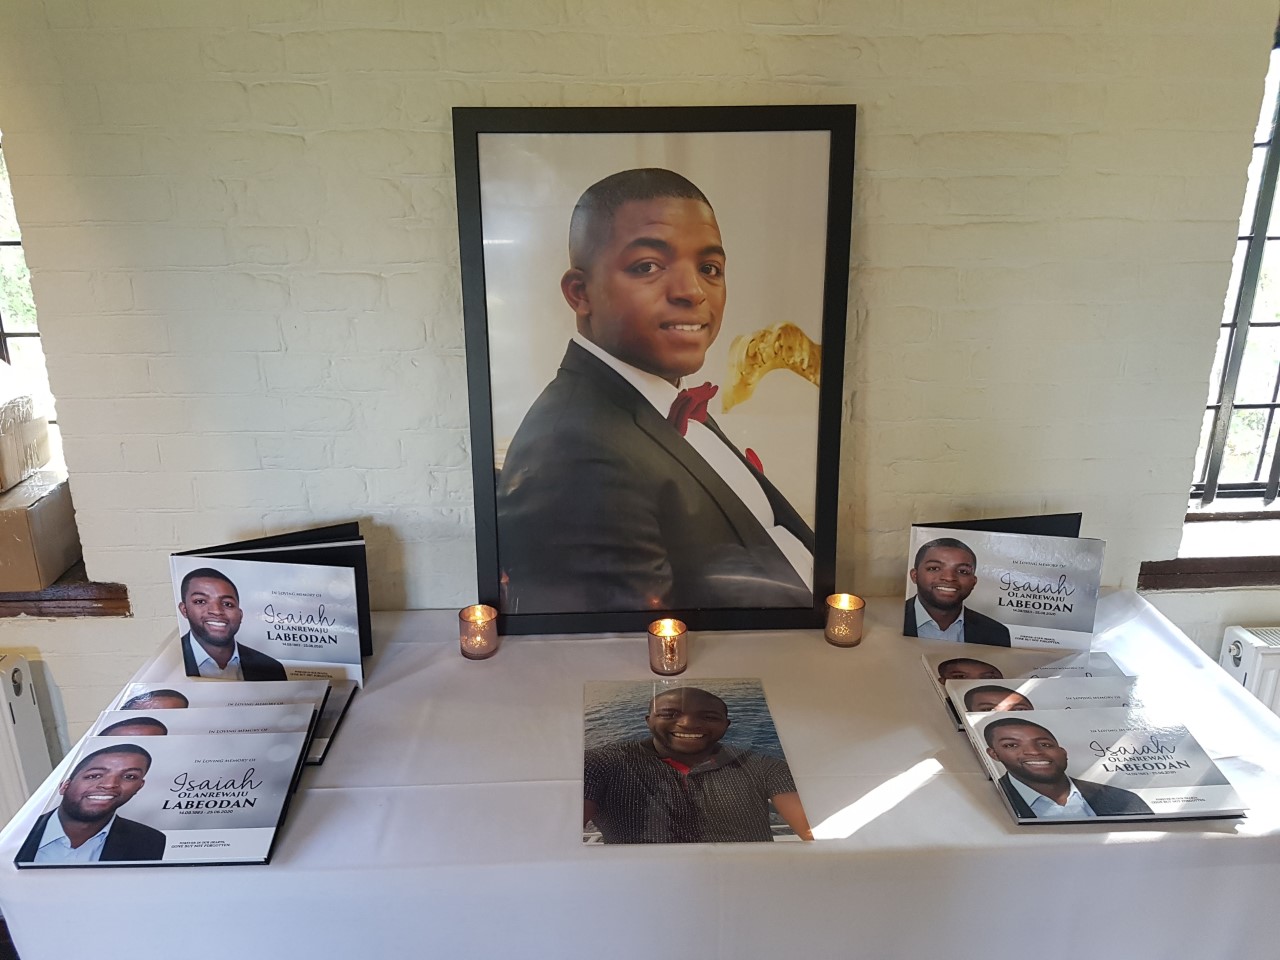 Tribute table for Zai with photos, candles and leaflets